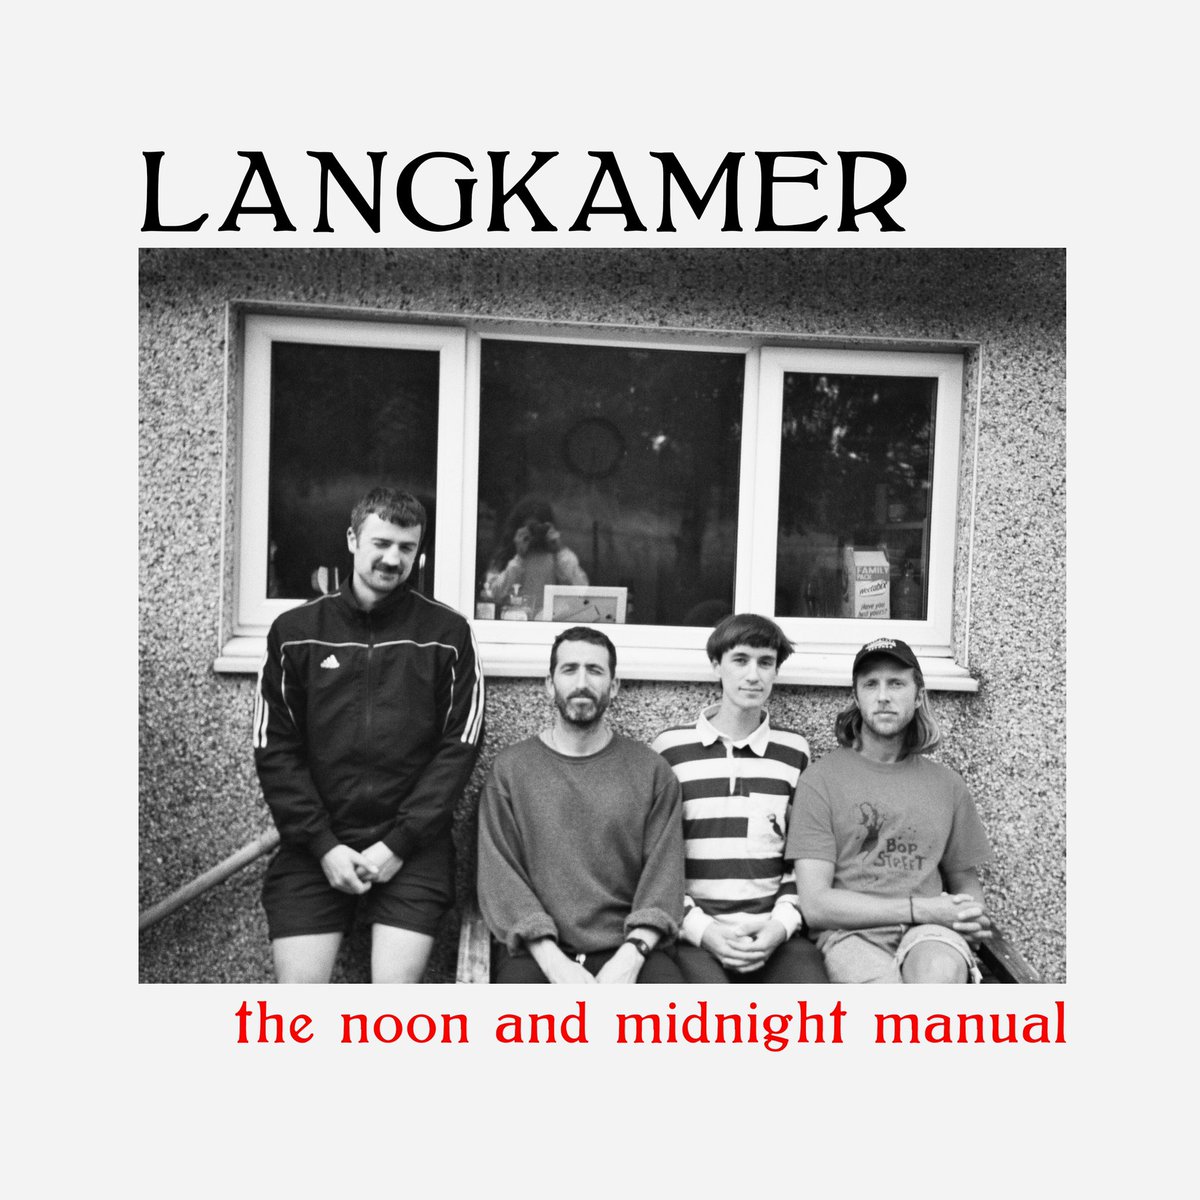 Big news, Lang Gang. Our second album ‘The Noon And Midnight Manual’ will be out on May 18th. The first single ‘Sing At Dawn’ is out now, with a music video to go with it. We hope you like it. This is an album about loneliness, love, time, capitalism, seasons, the world,